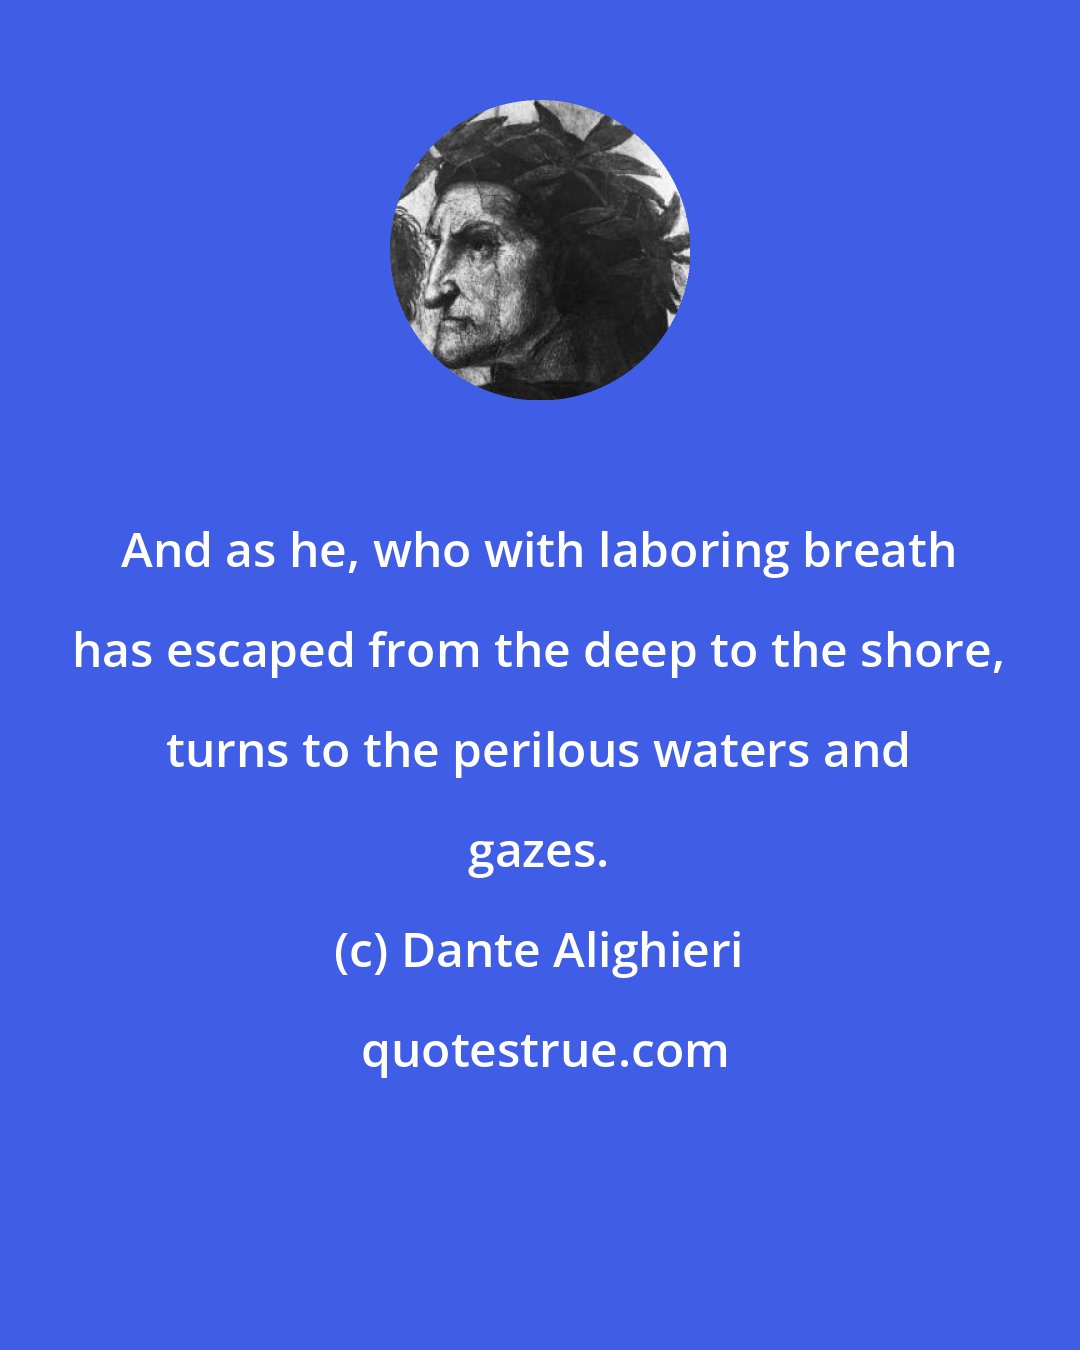 Dante Alighieri: And as he, who with laboring breath has escaped from the deep to the shore, turns to the perilous waters and gazes.